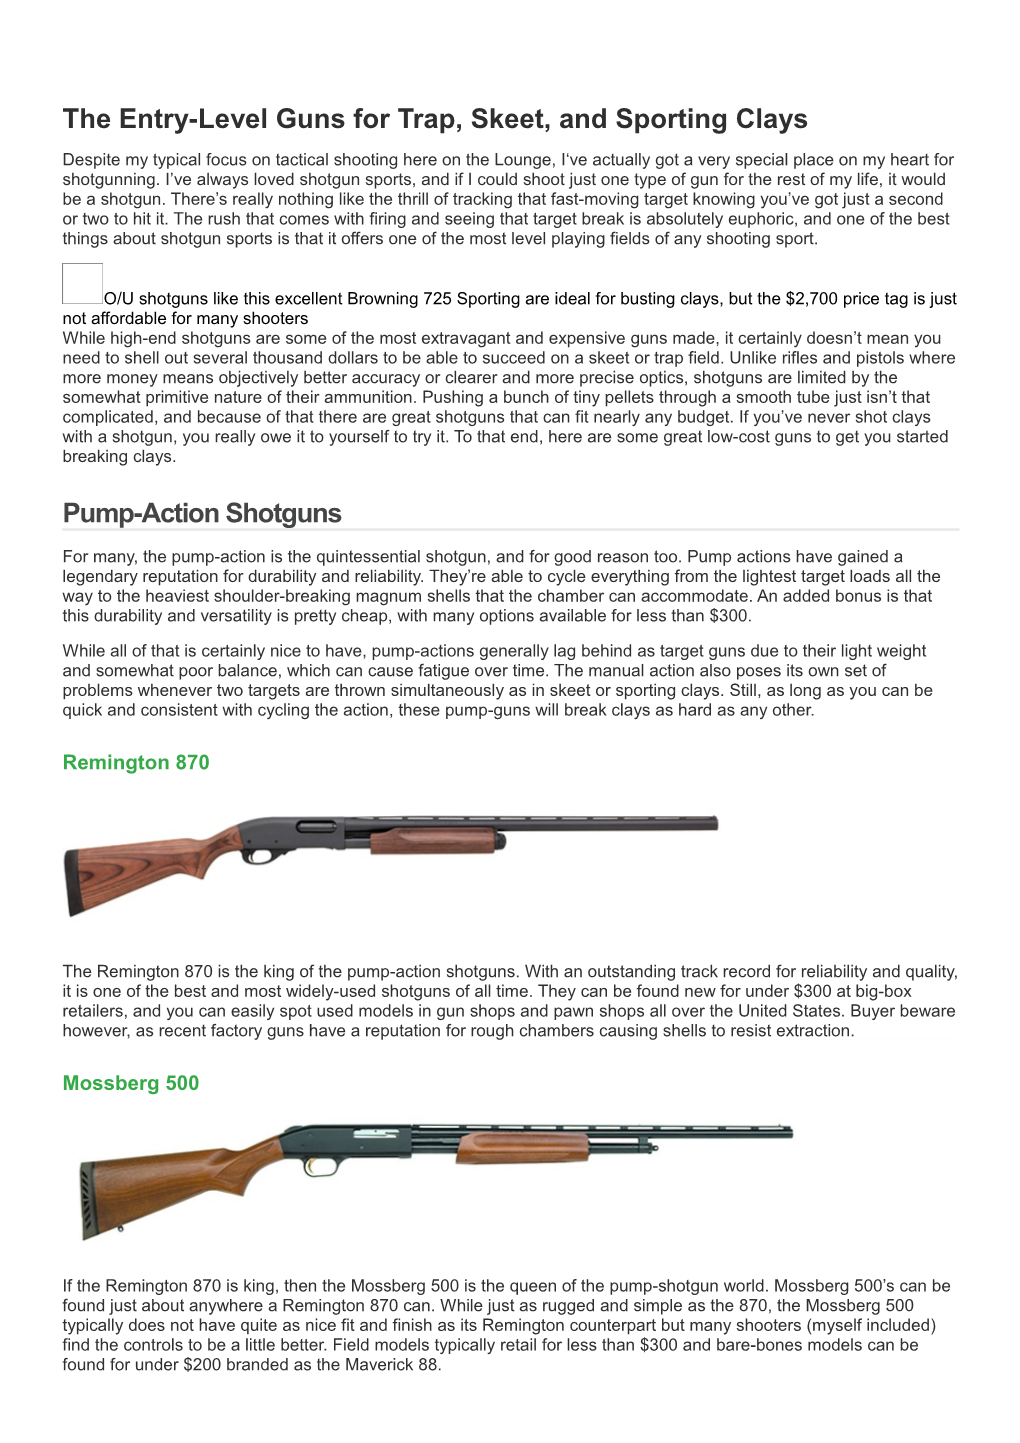 The Entry-Level Guns for Trap, Skeet, and Sporting Clays